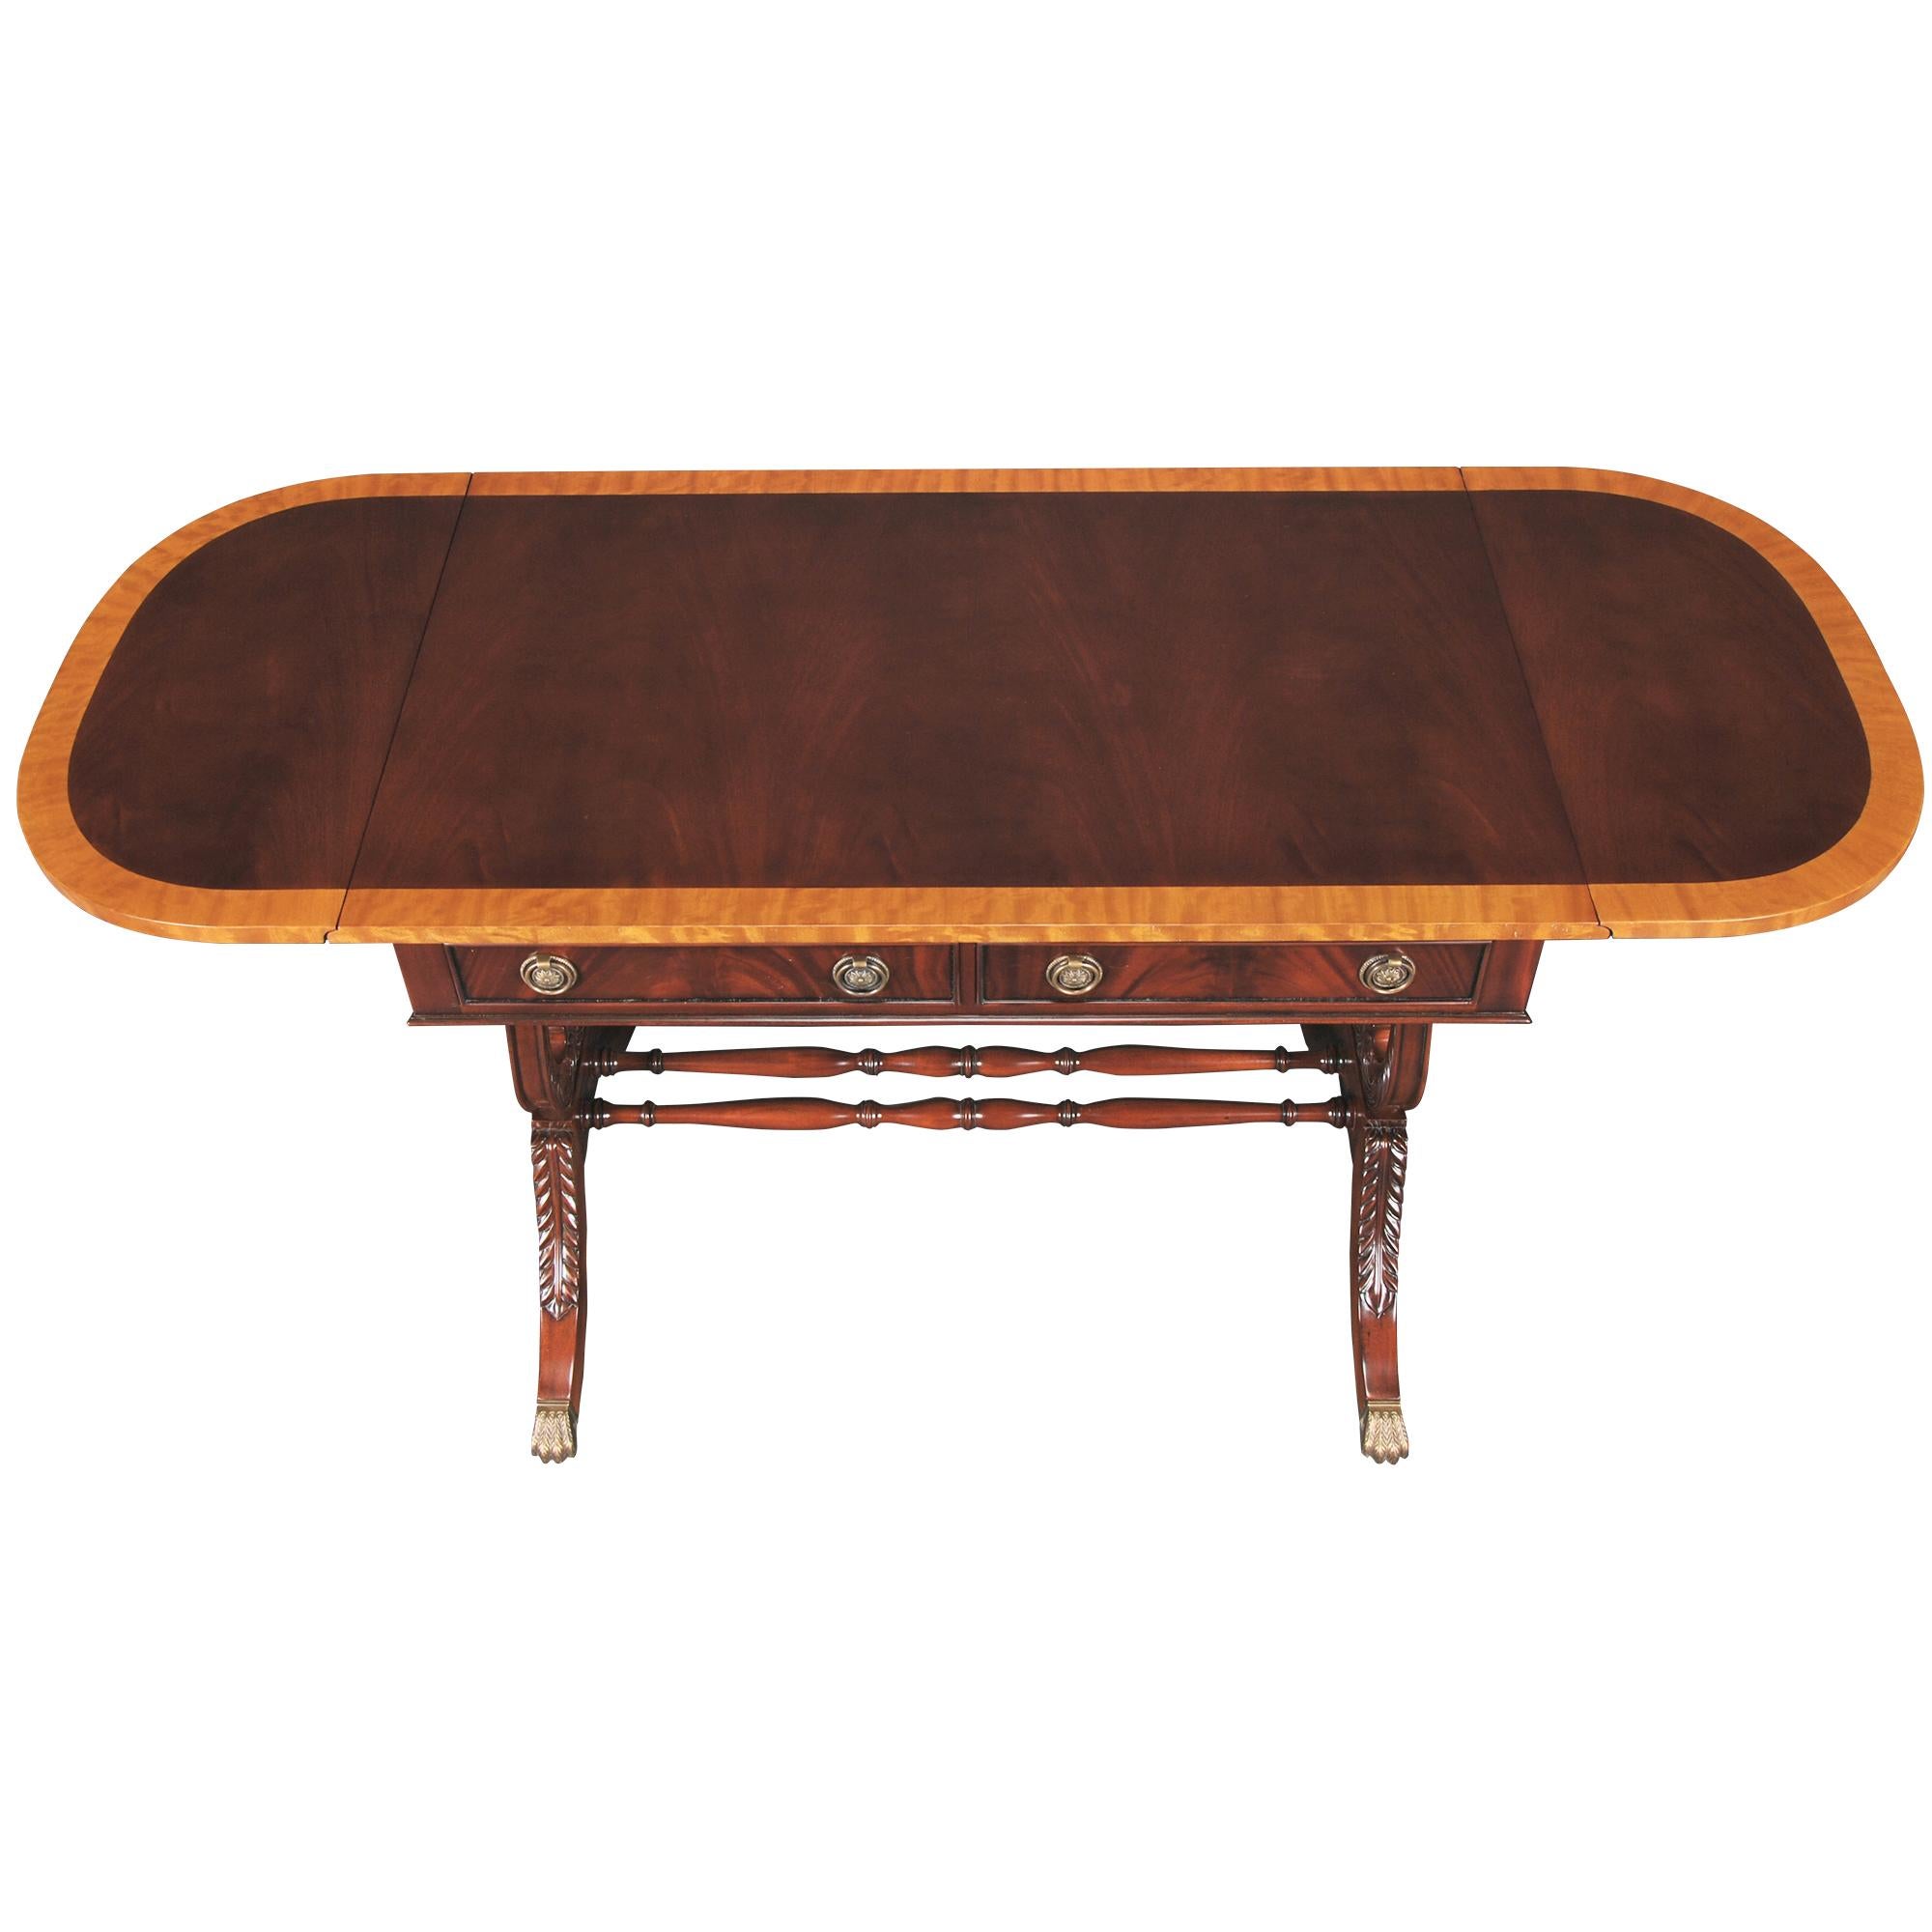 Yet another item in the lyre collection, our Dropside Lyre or Harp Desk has a beautifully crafted top featuring figural mahogany and satinwood, all of which is hand cut and pieced together by skilled artisans. The Dropside Lyre or Harp Desk also has